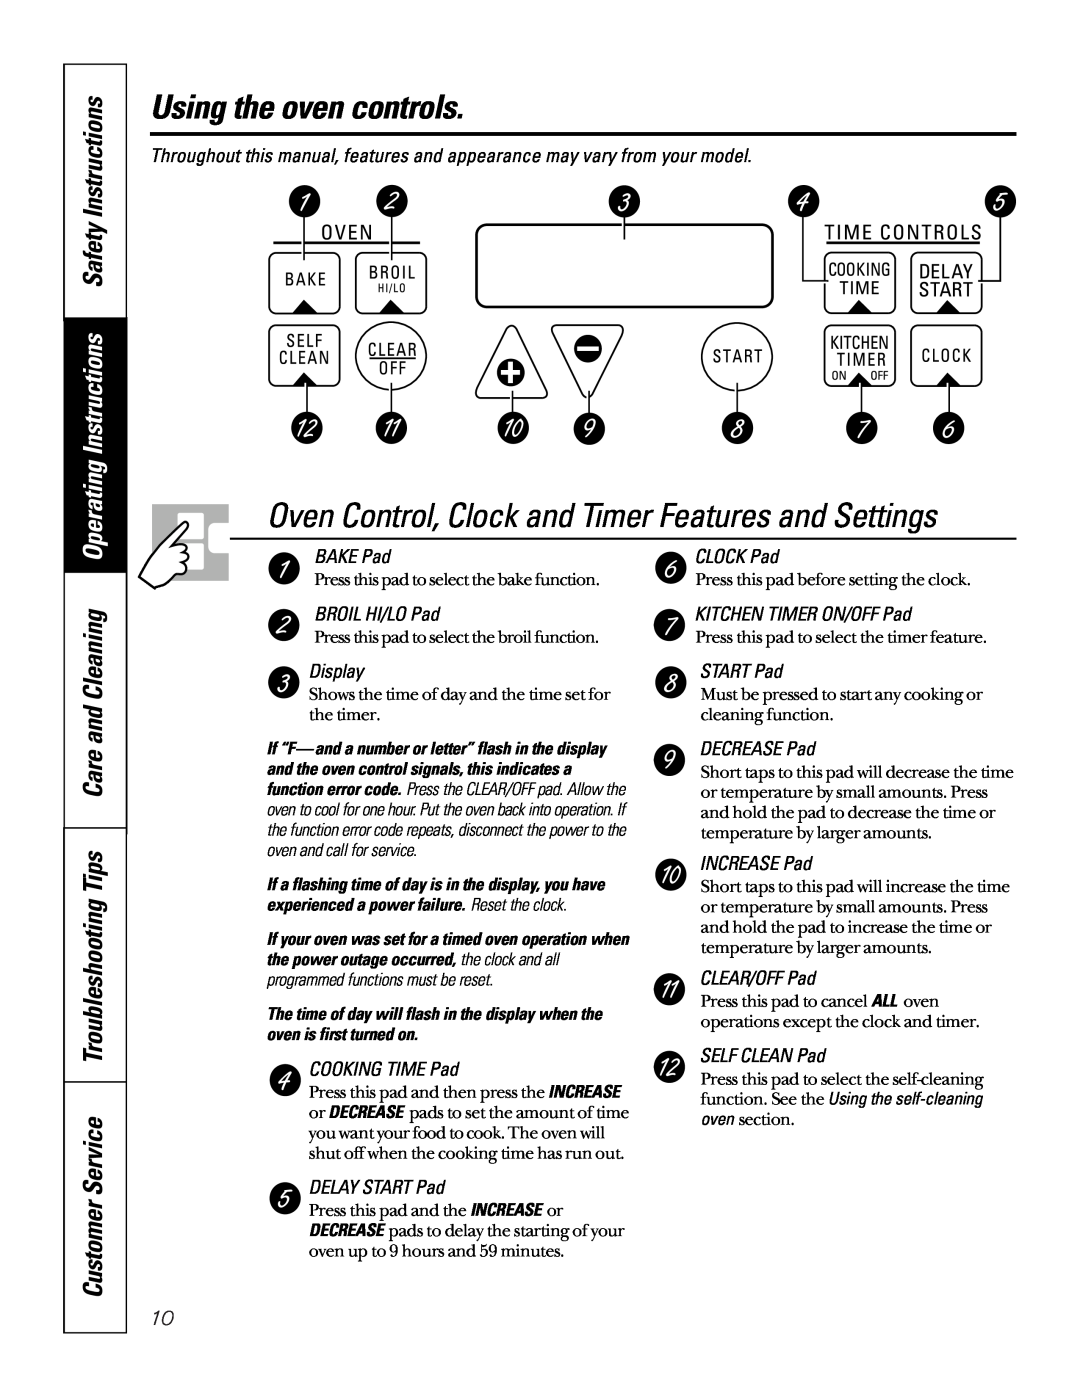 GE JGSP22 owner manual Using the oven controls, Oven Control, Clock and Timer Features and Settings 